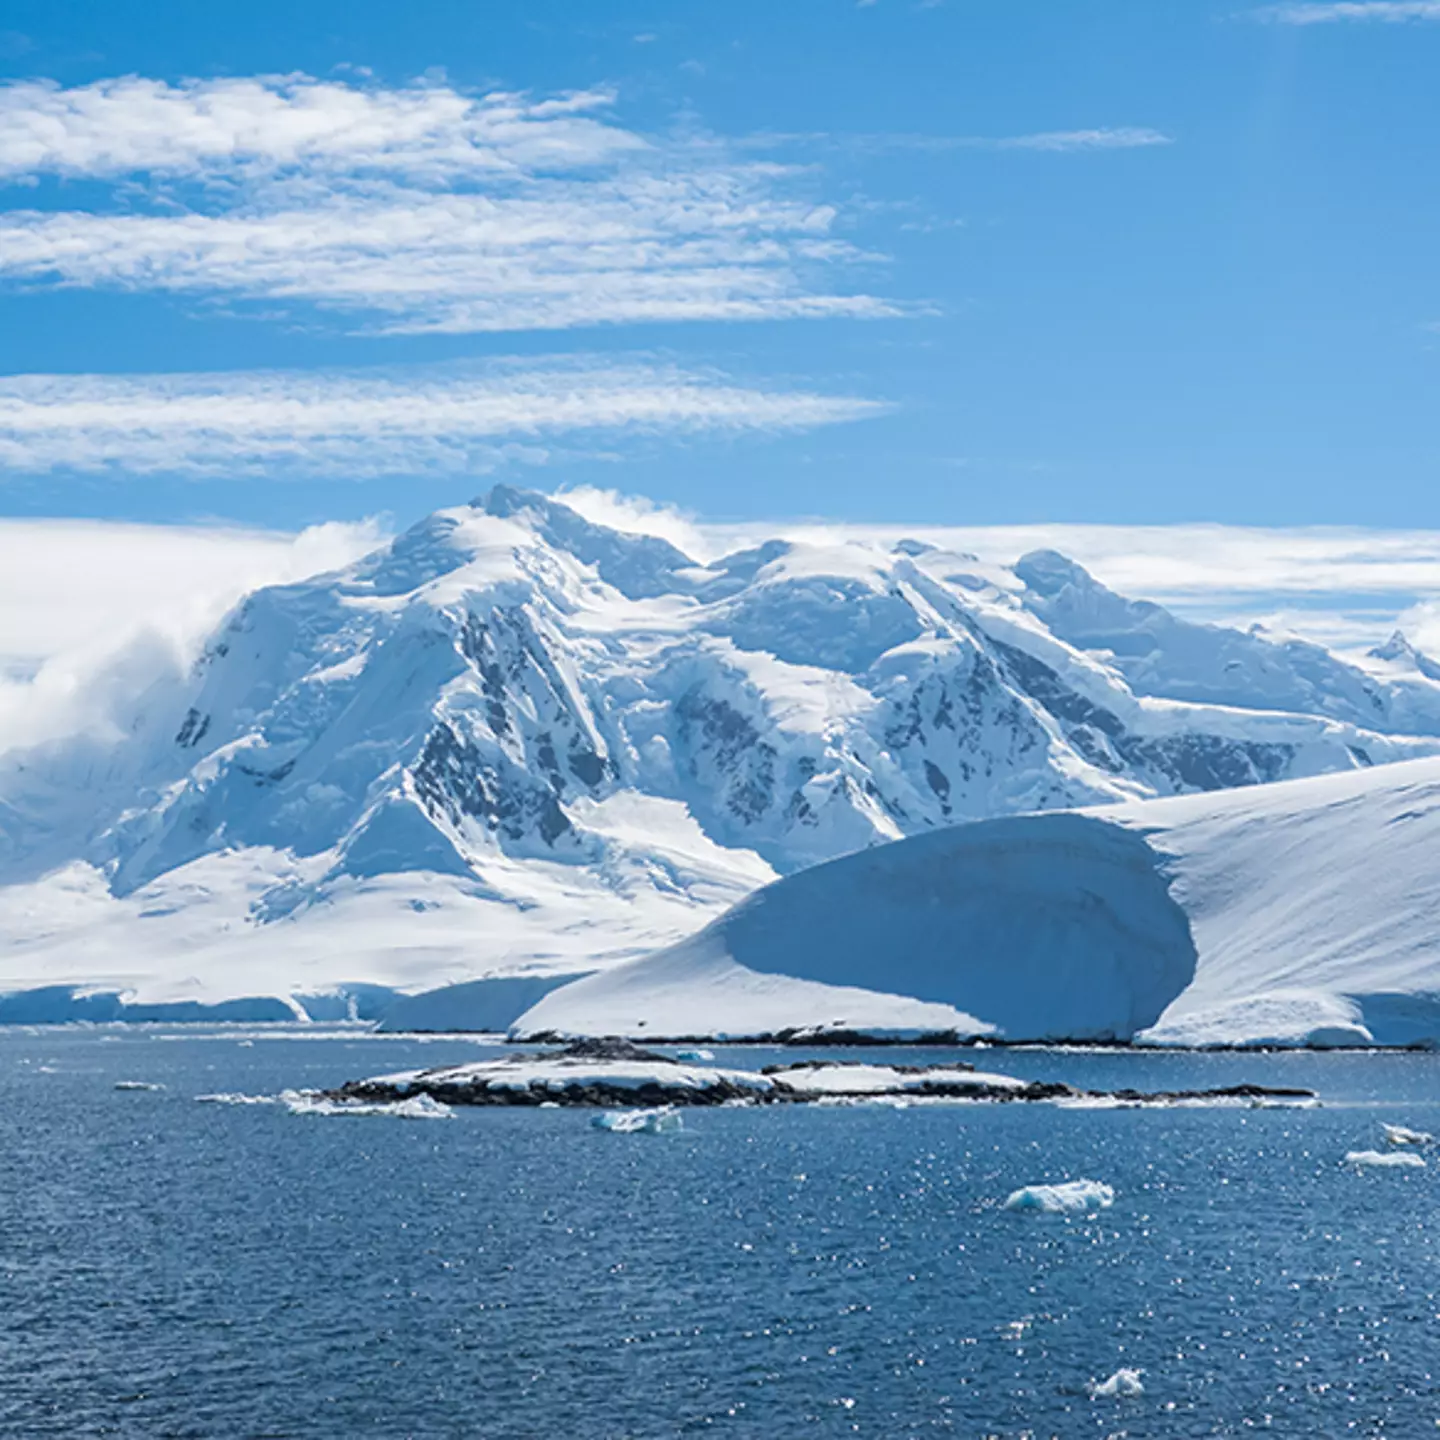 Google Maps sleuths think they’ve discovered a huge mysterious door in Antarctica